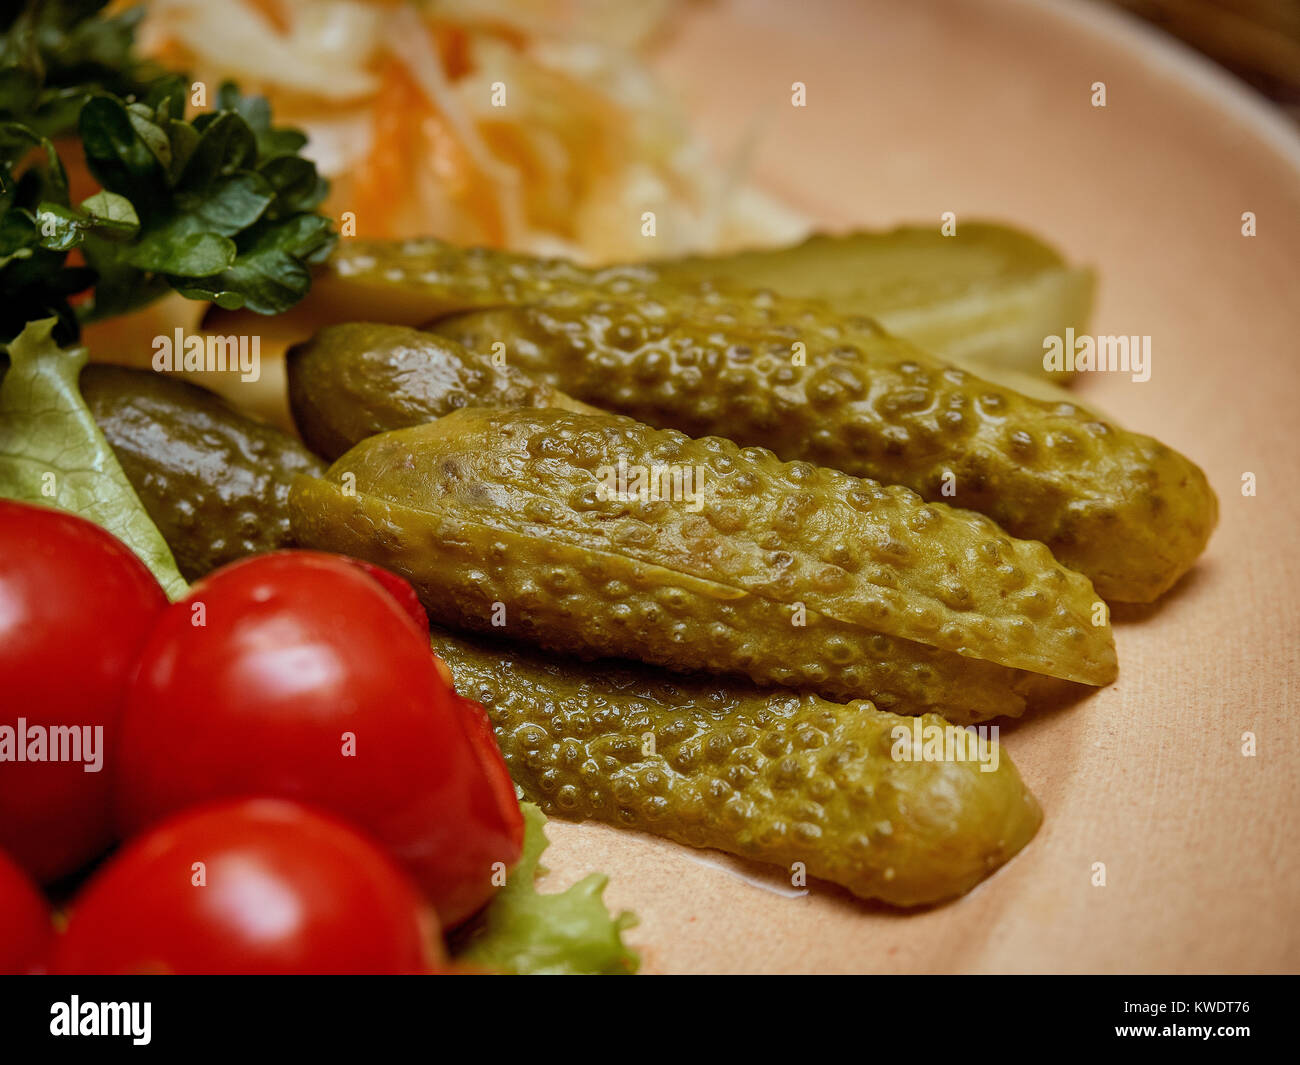 Finely chopped pickled vegetables are nicely laid out on a plate. Stock Photo